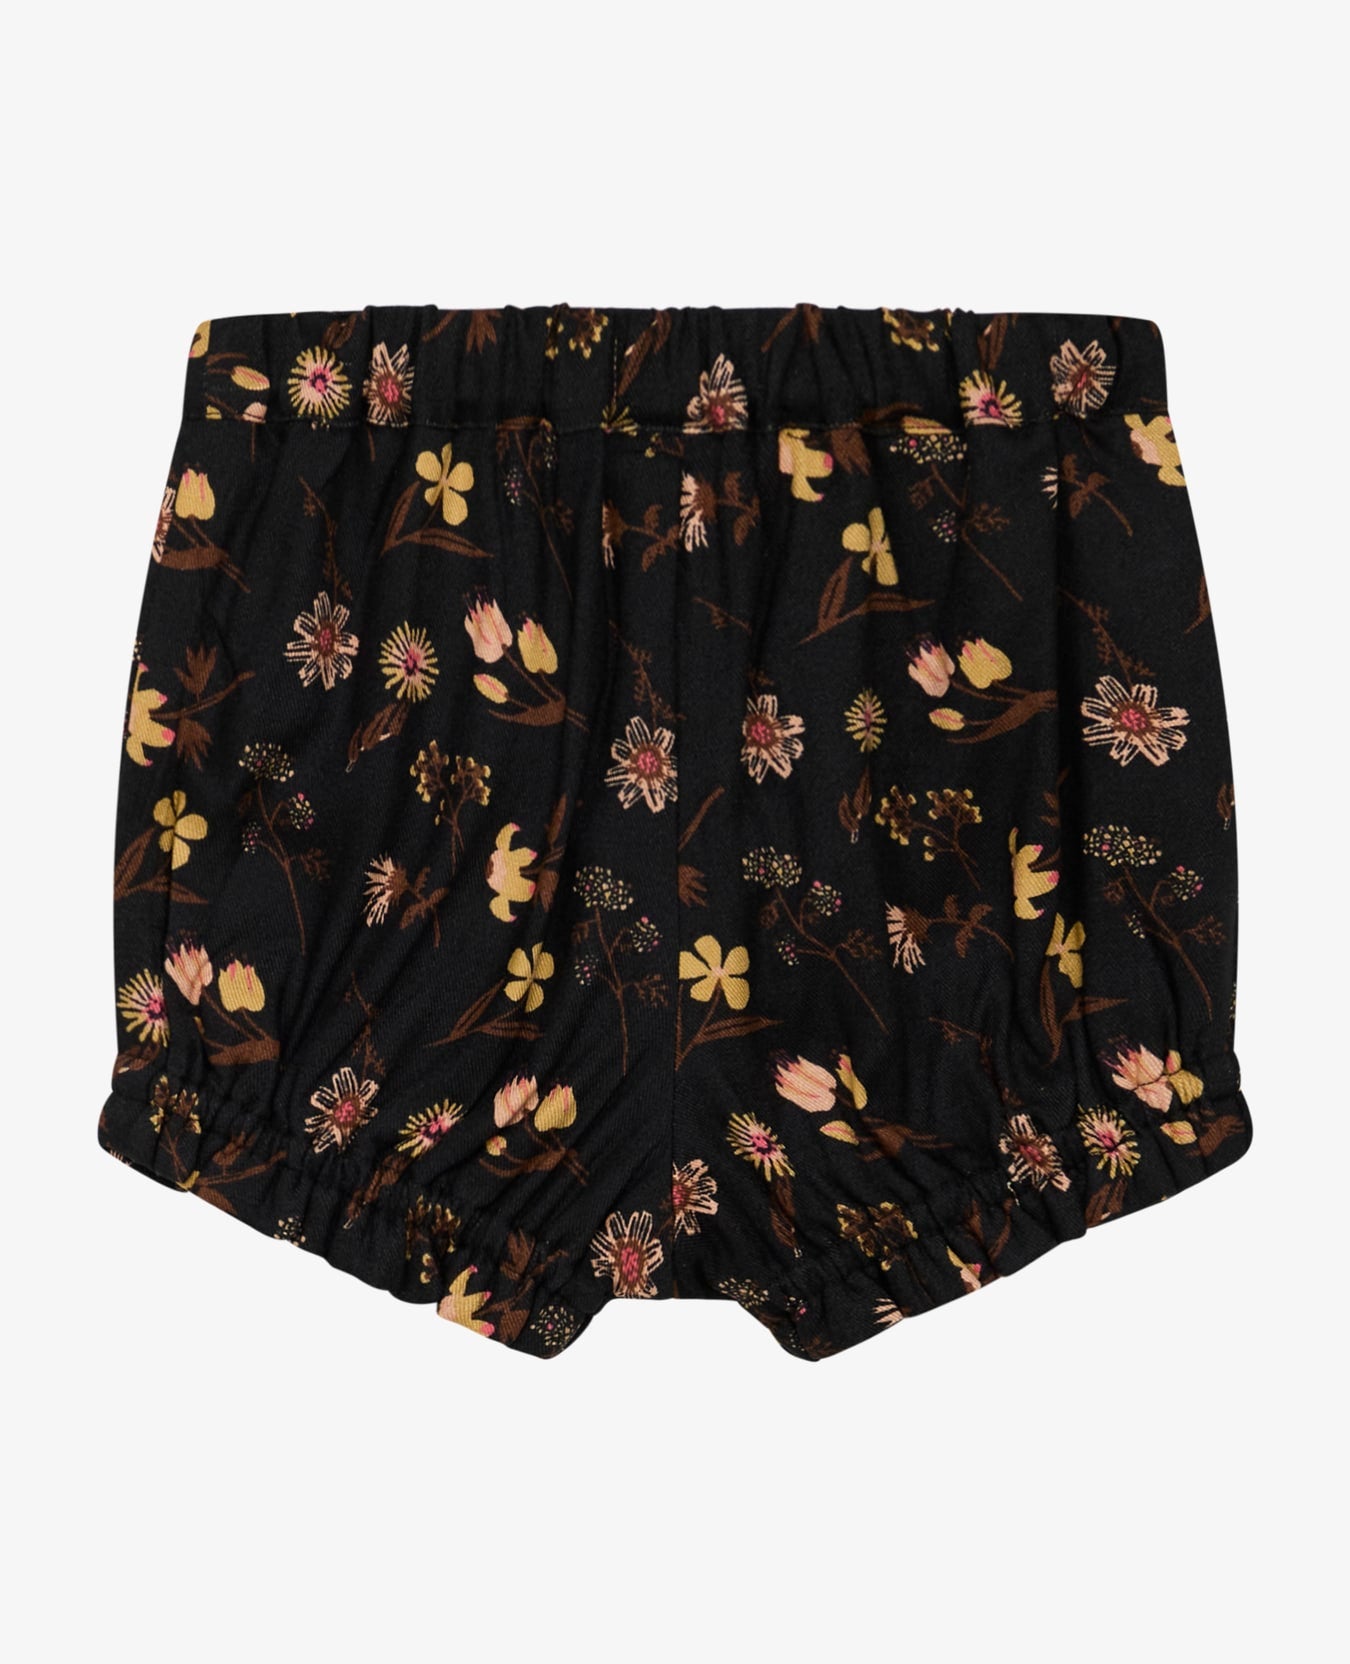 FAYANNM PRINTED BABY BLOOMERS